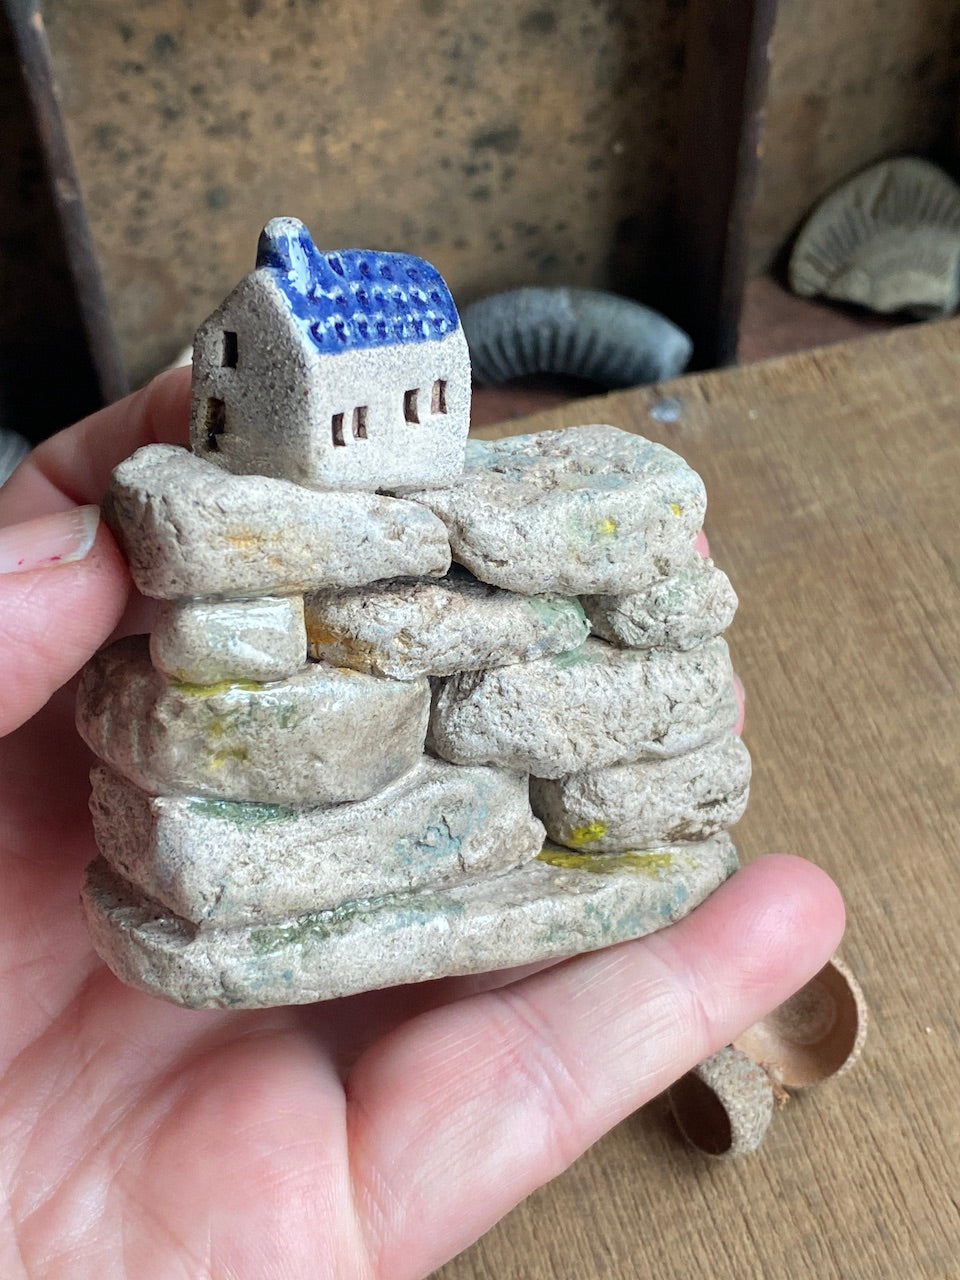 Handmade Pottery Sculpture featuring Small Houses